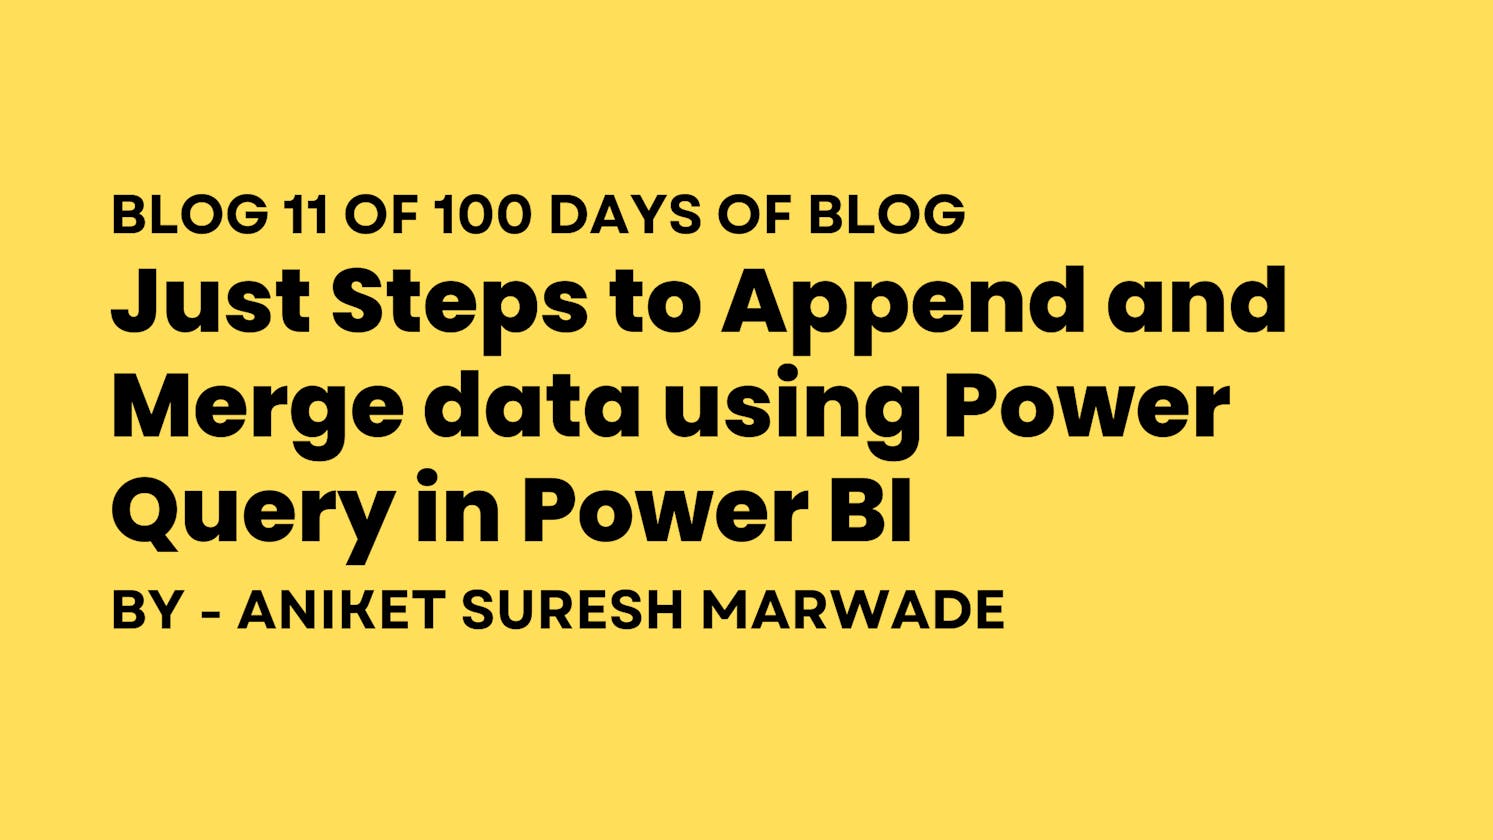 Just Steps to Append and Merge data using Power Query in Power BI